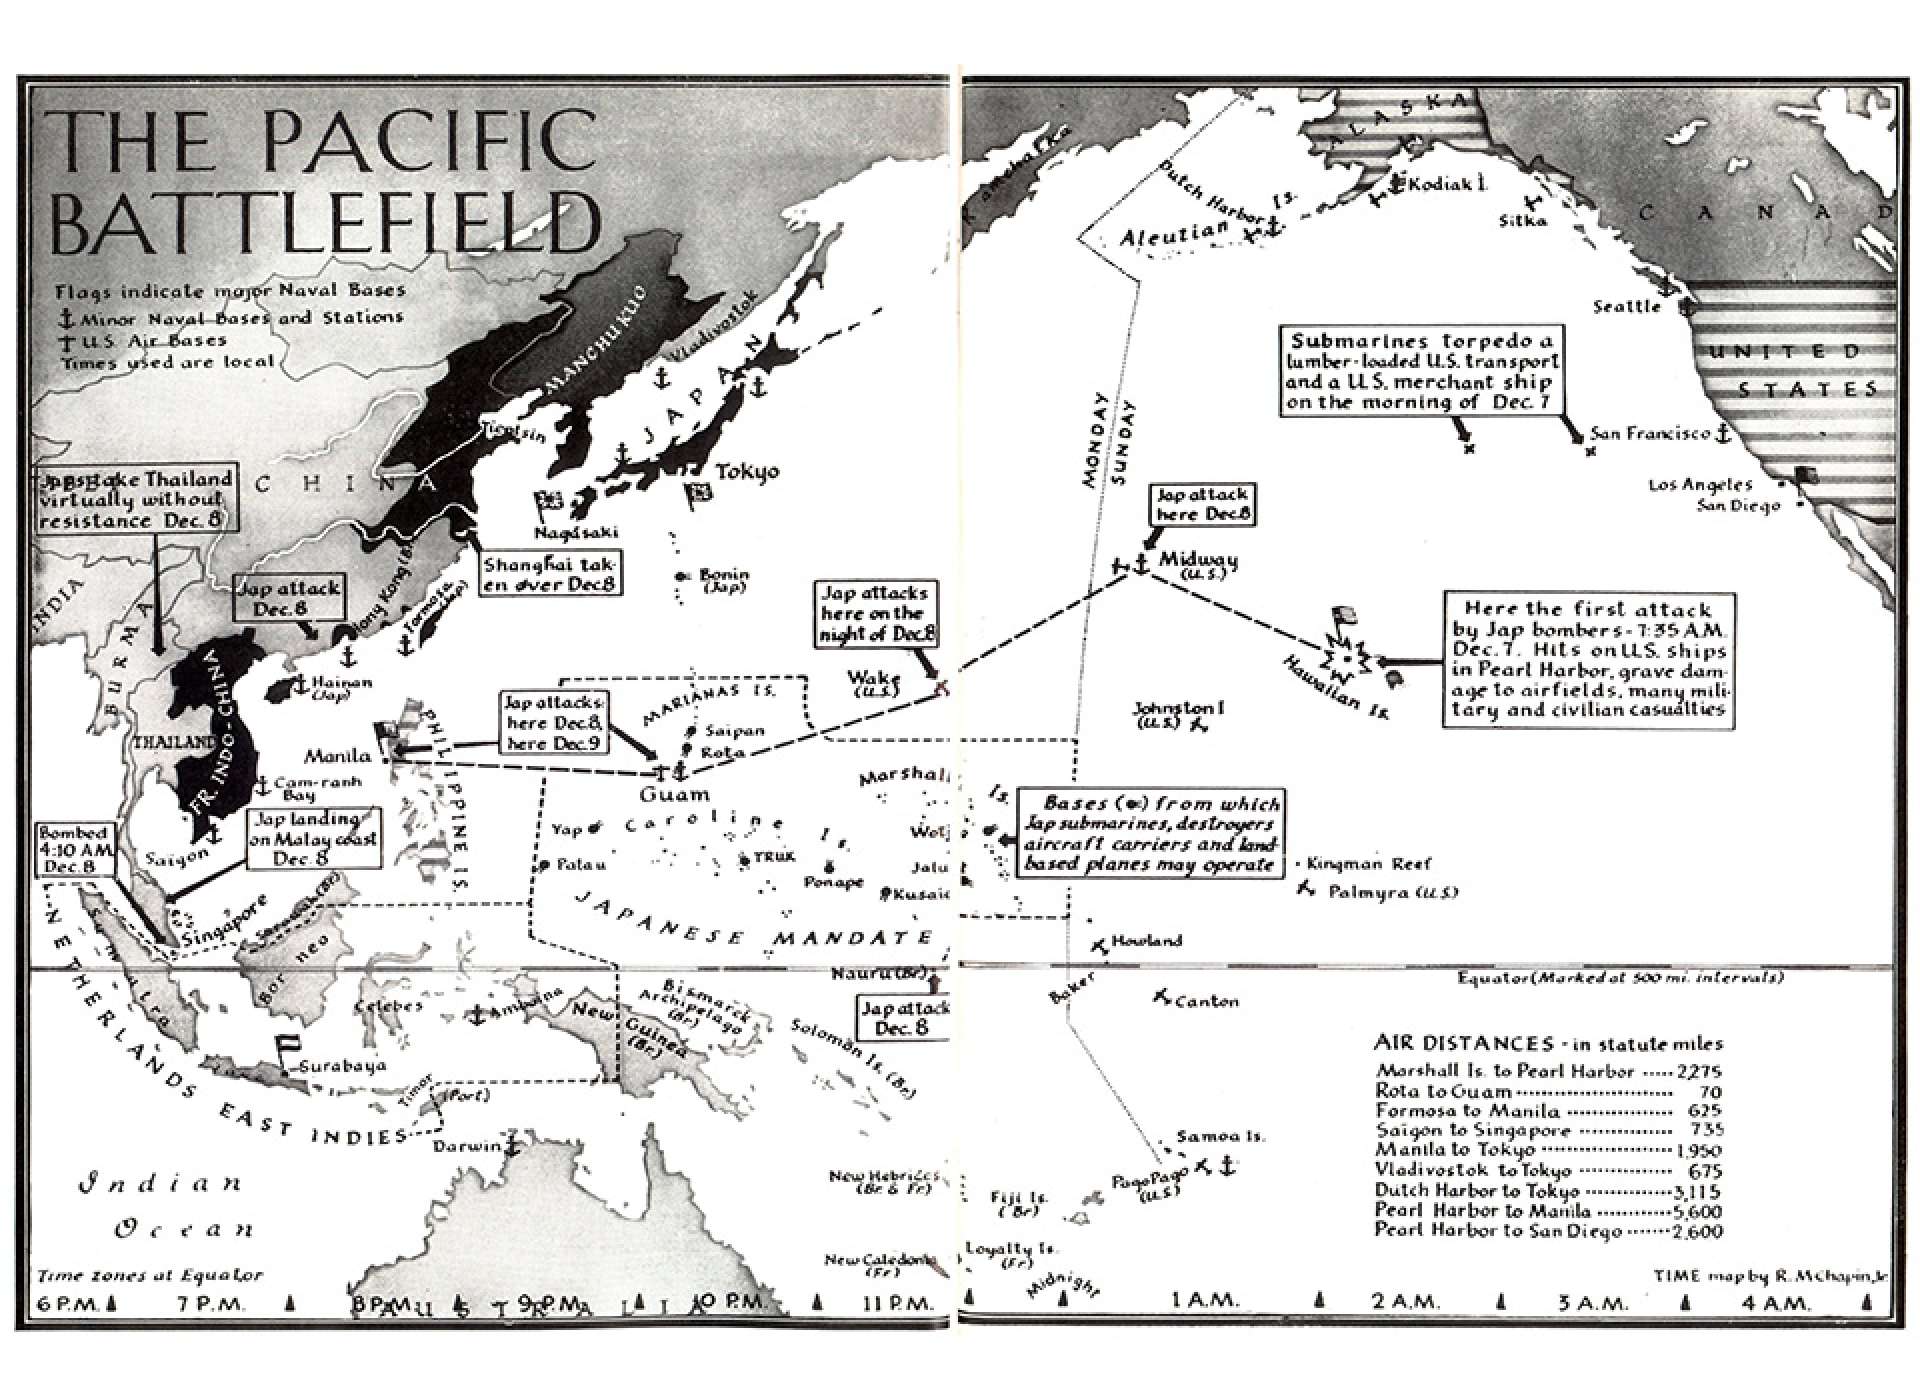 Map by Time Magazine Dec 1941 shows the attacks by Japanese forces on Pearl Harbor and other locations